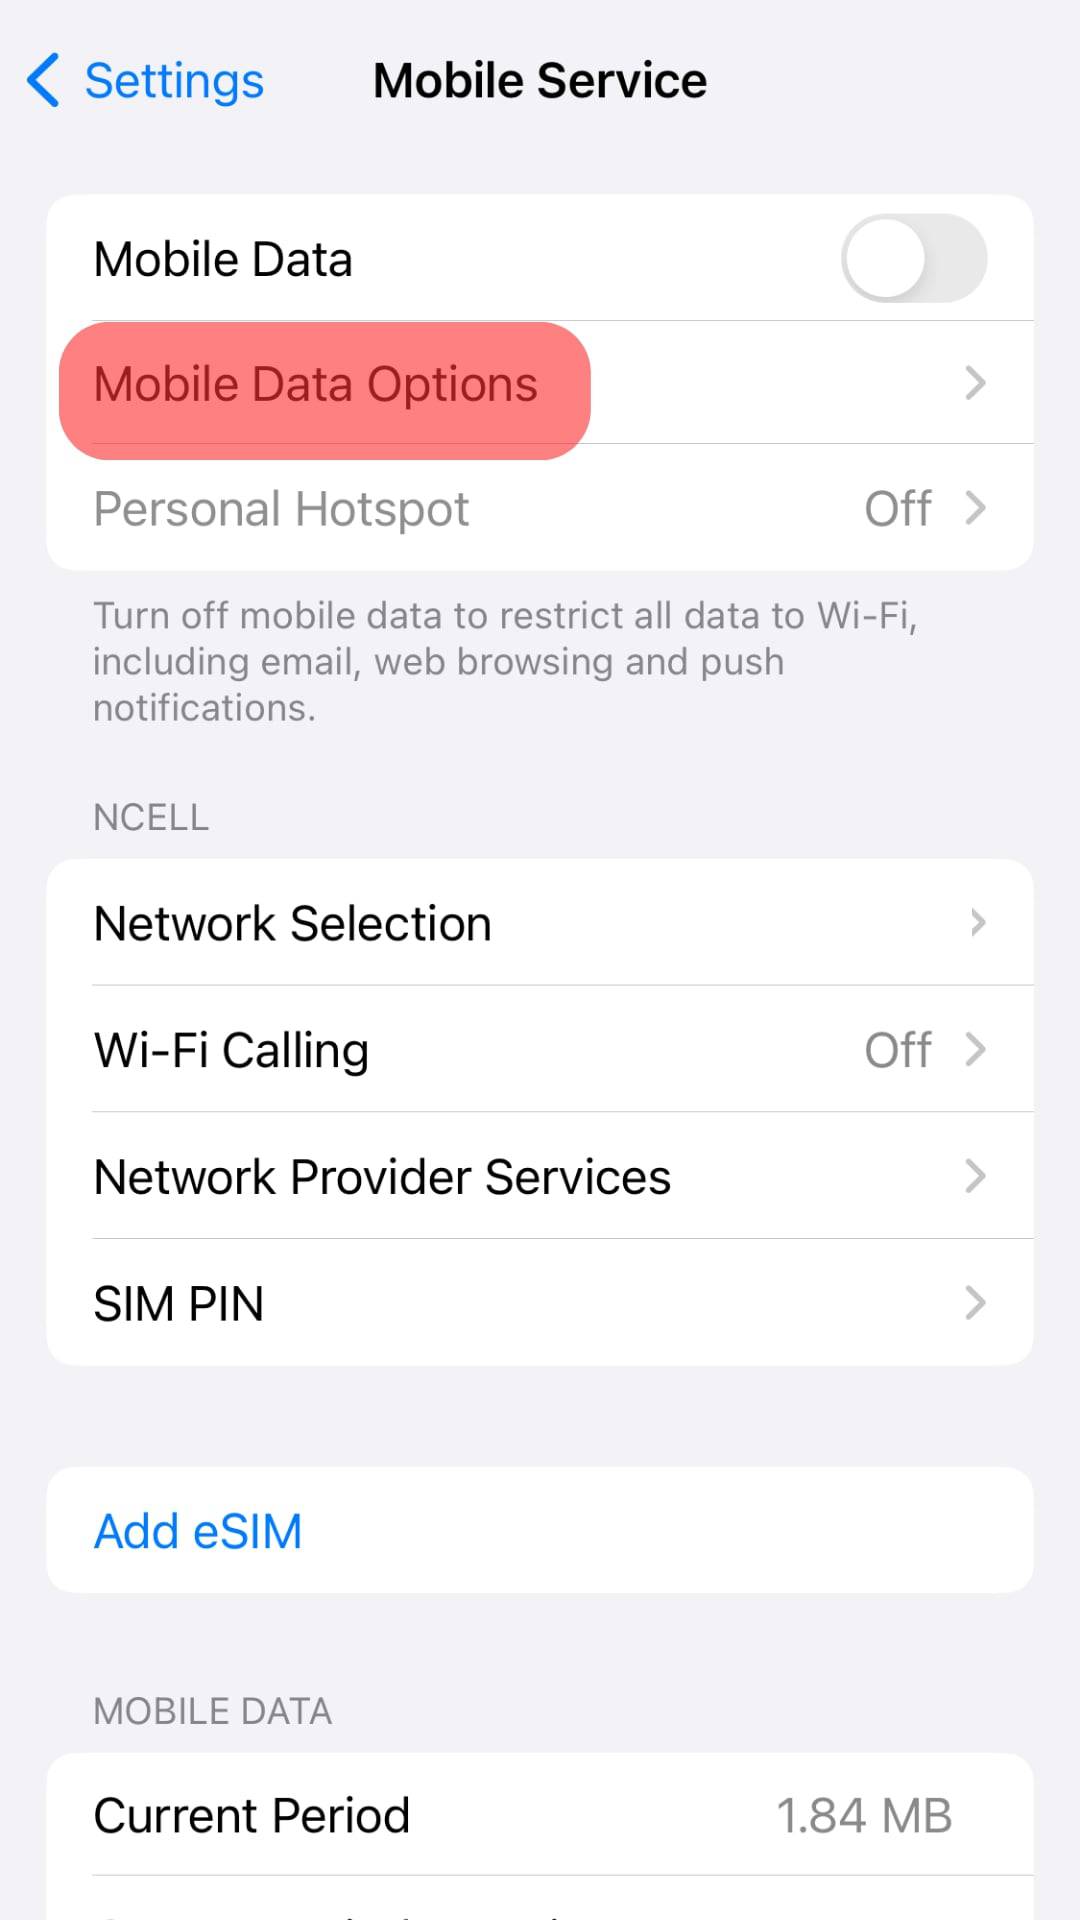 Tap On “Mobile Data Options.”